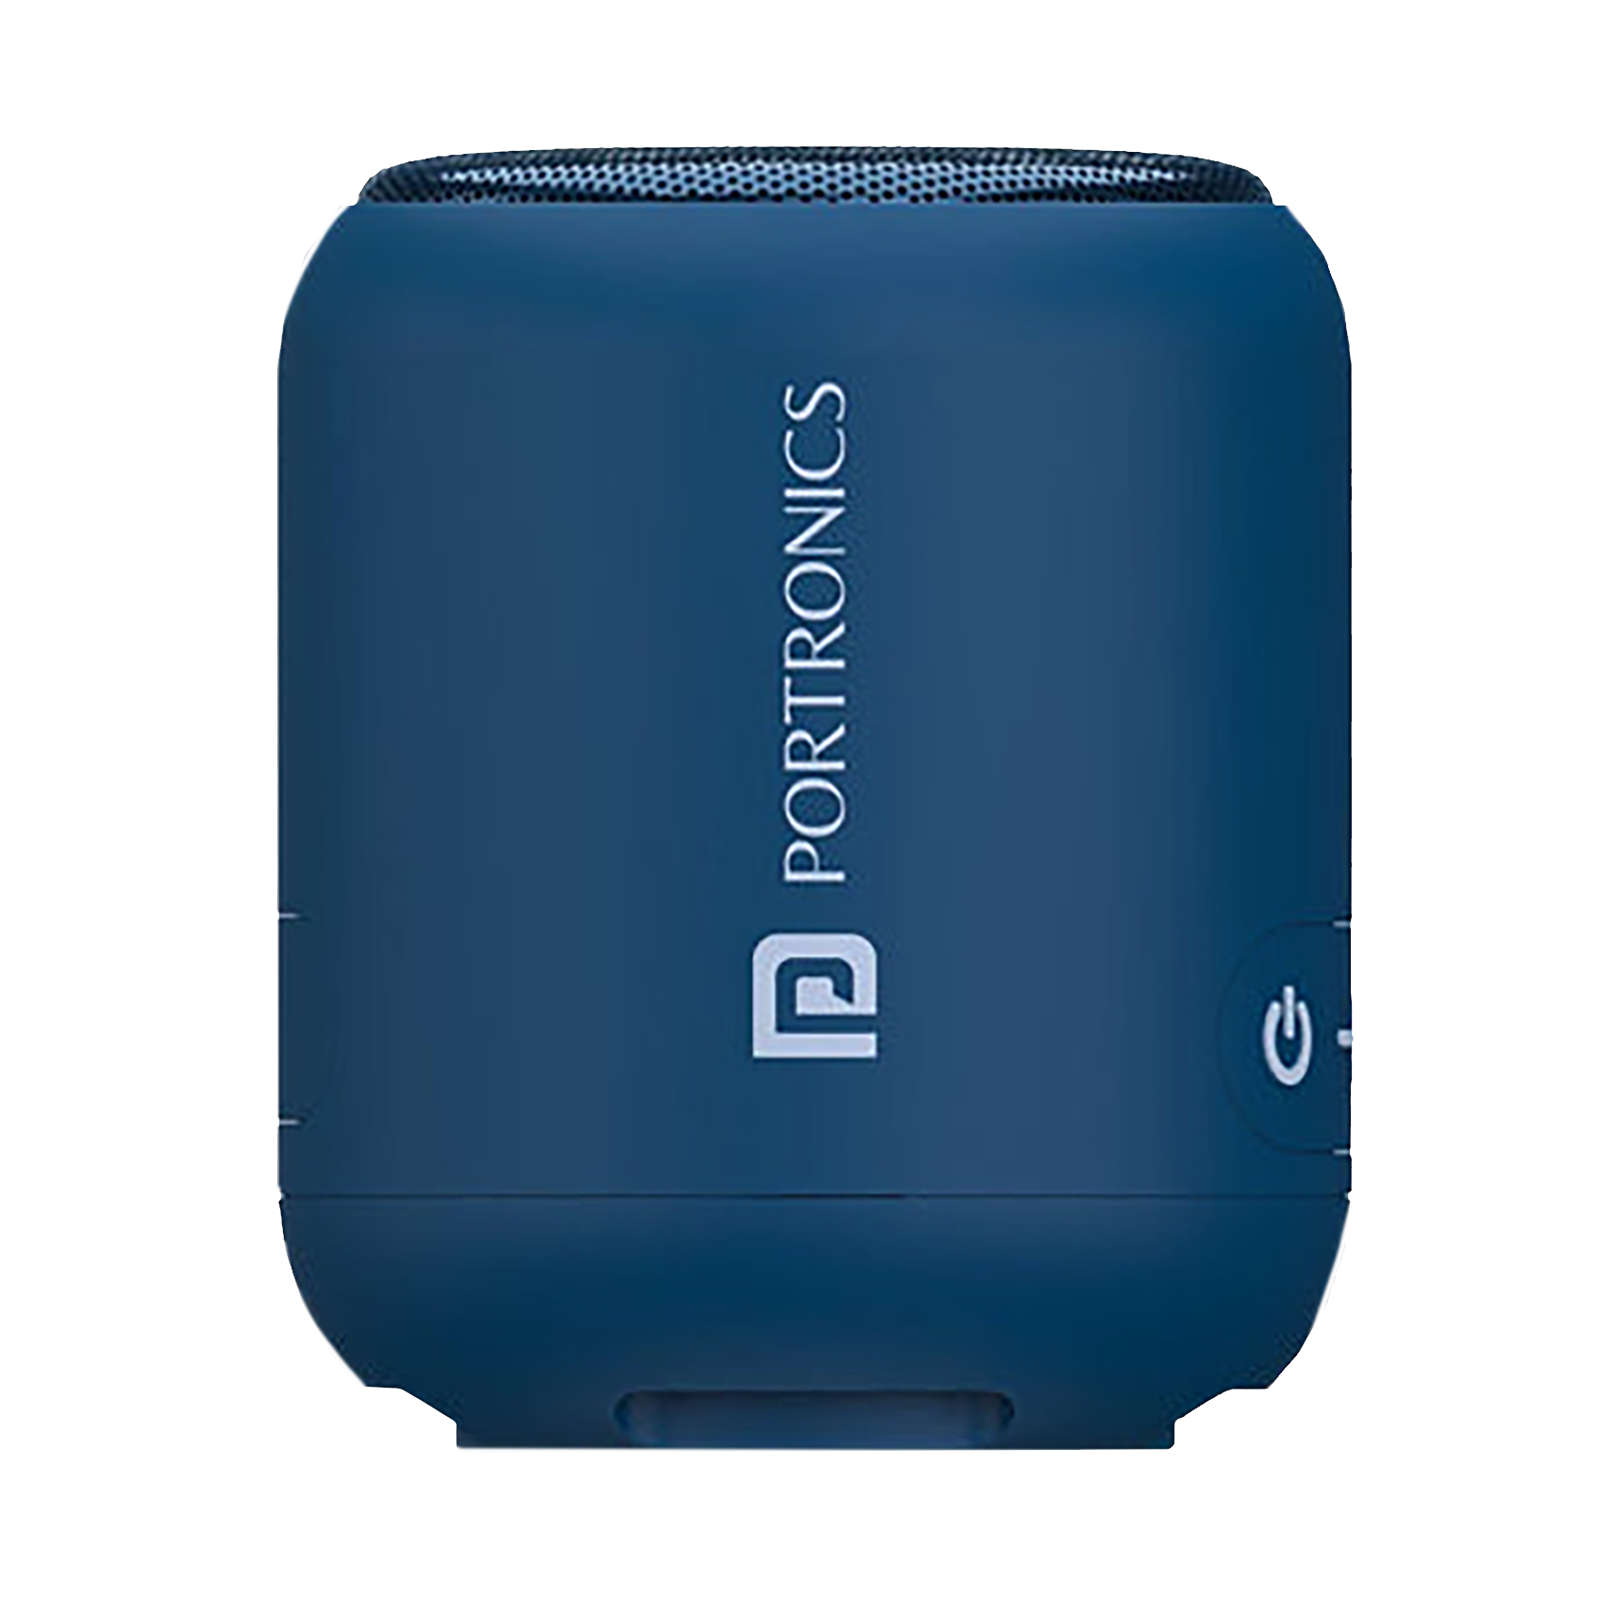 PORTRONICS Sound Drum 1 10W Portable Bluetooth Speaker (10 Hours Playtime, 5.1 Channel, Blue)